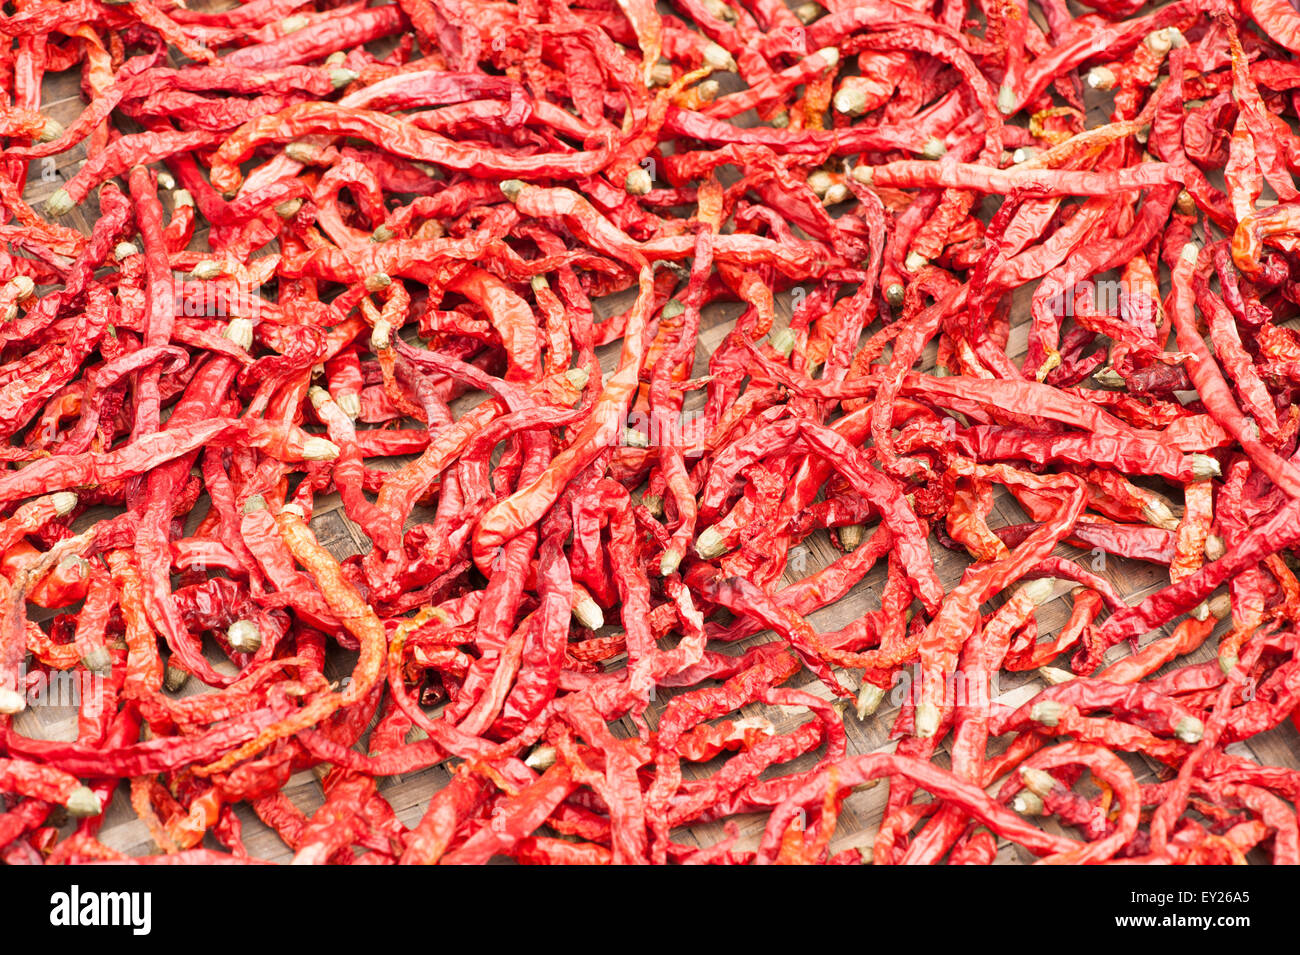 Red pepper drying outdoors in a basket - Chongzhou, Sichuan Province, China Stock Photo